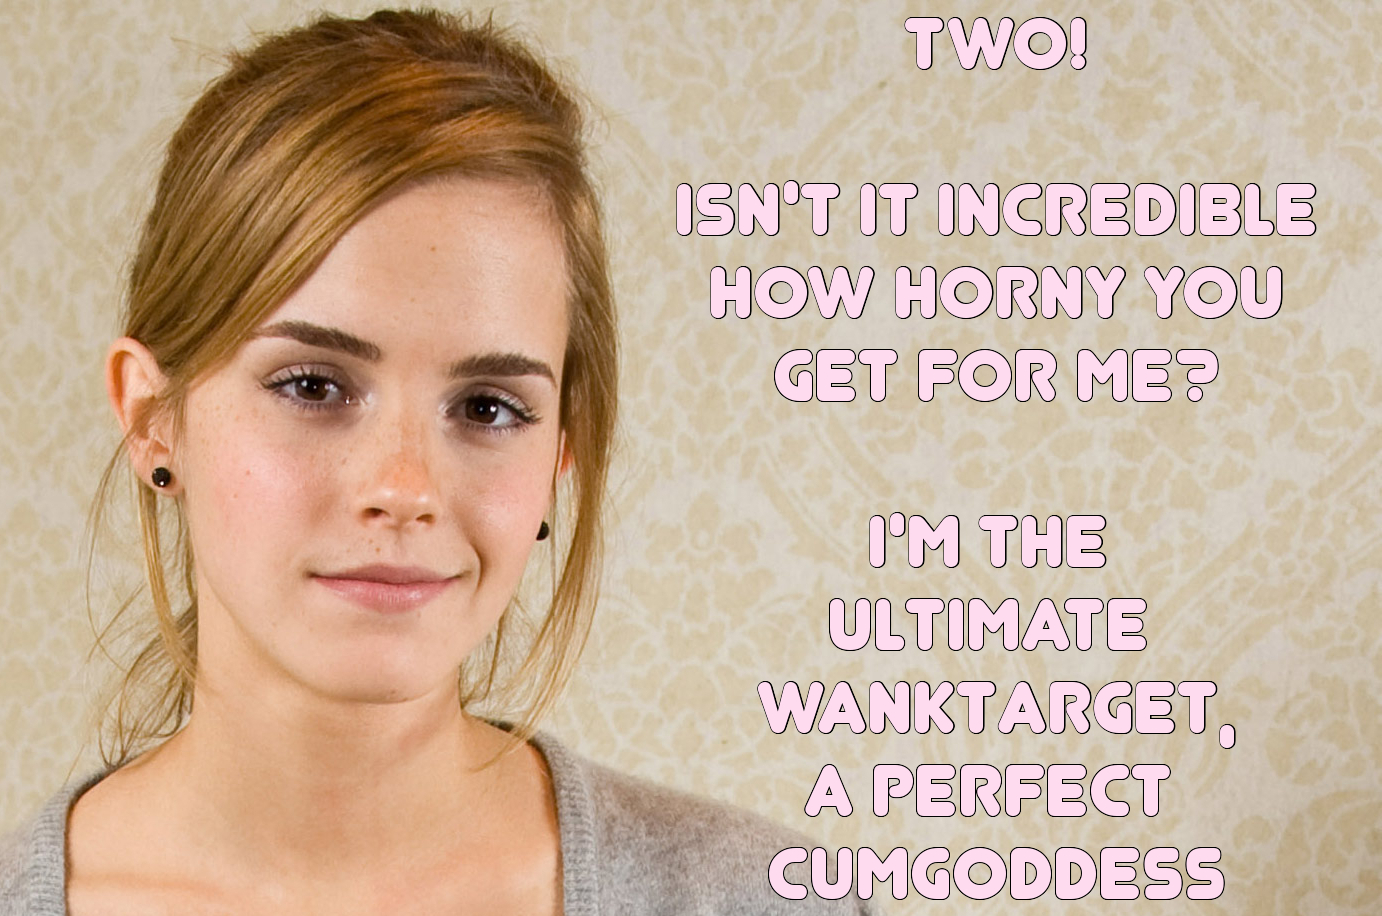 Code M. recomended emma watson joi